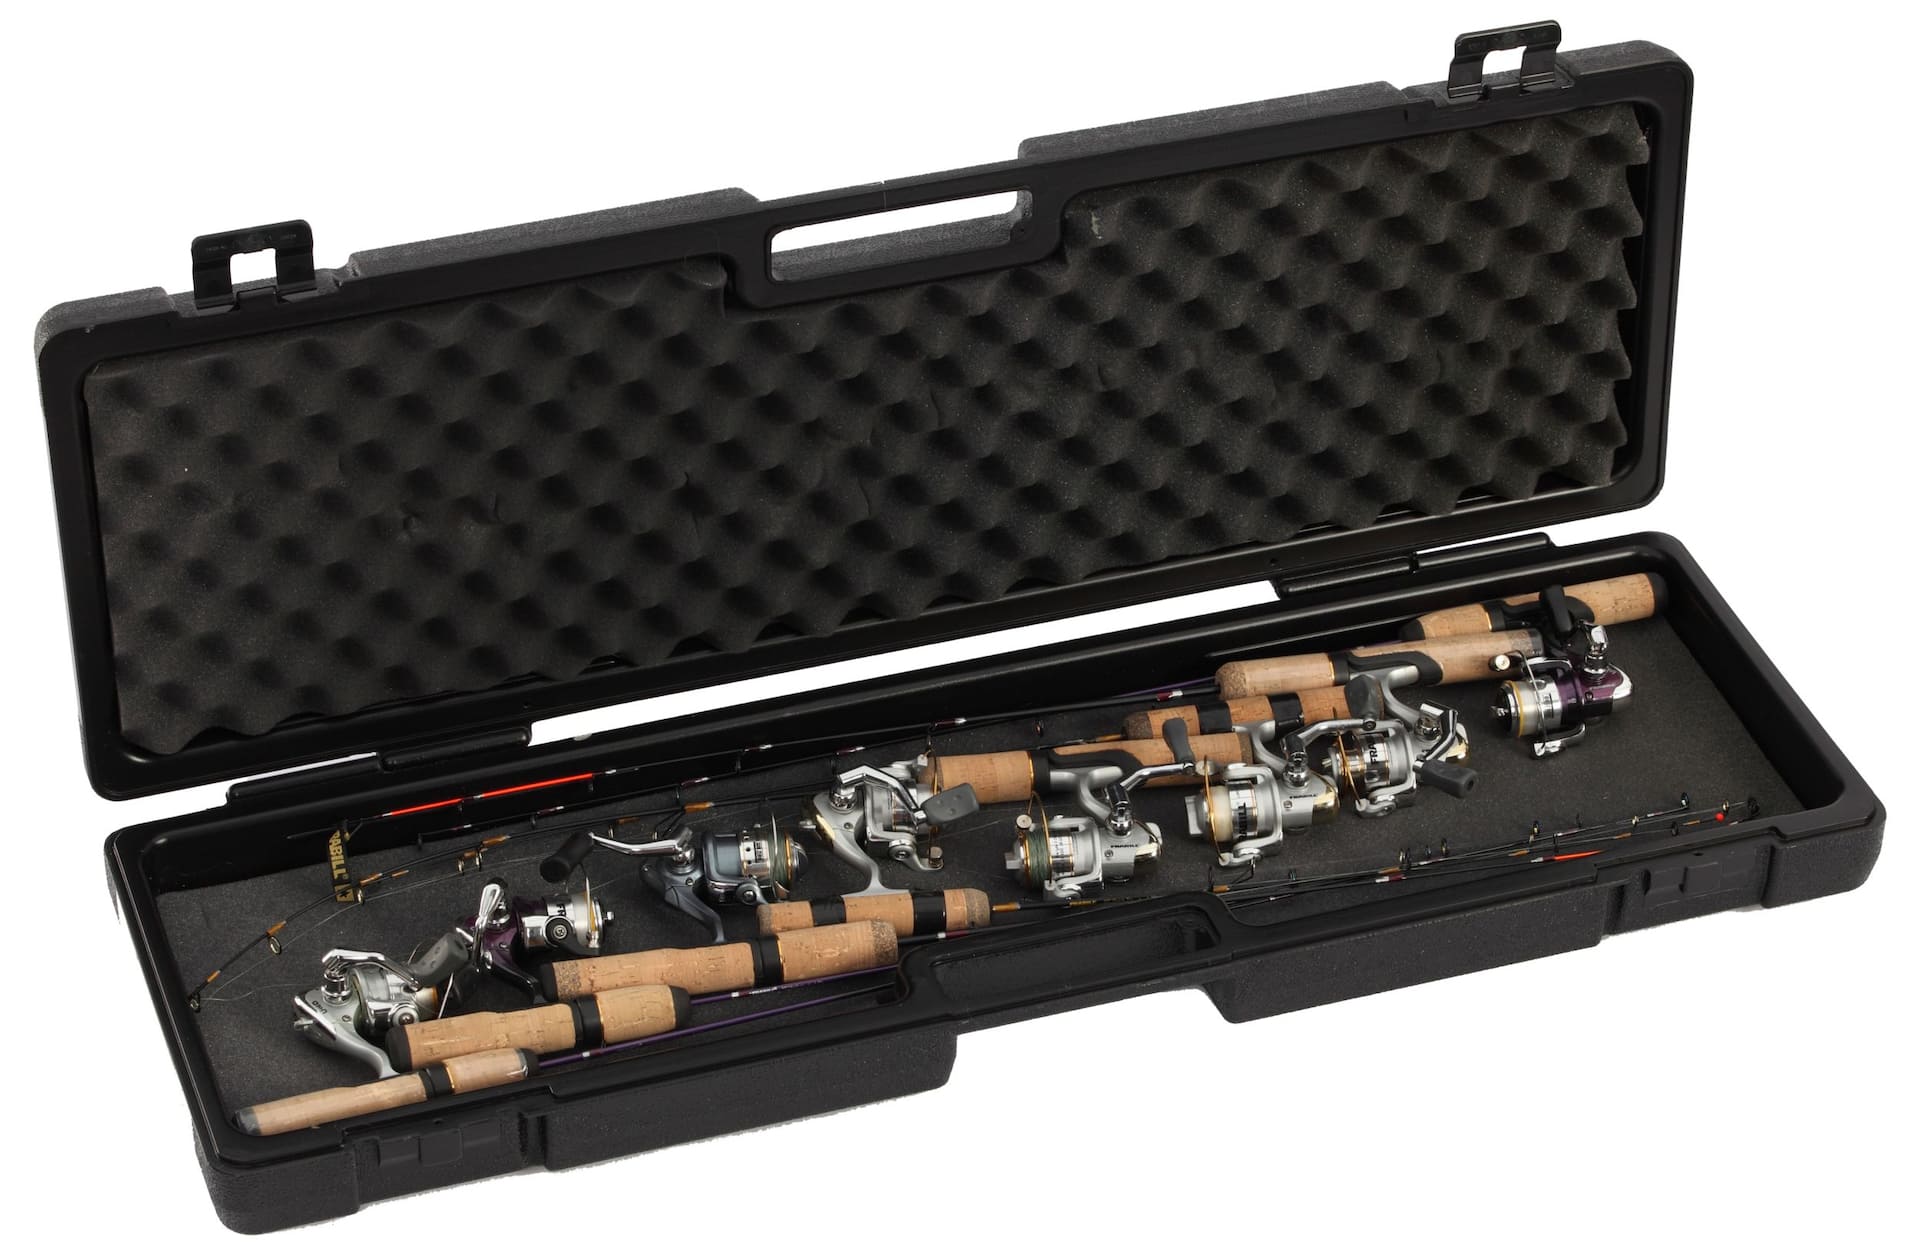 Secure long trip storage and long fishing rod storage.